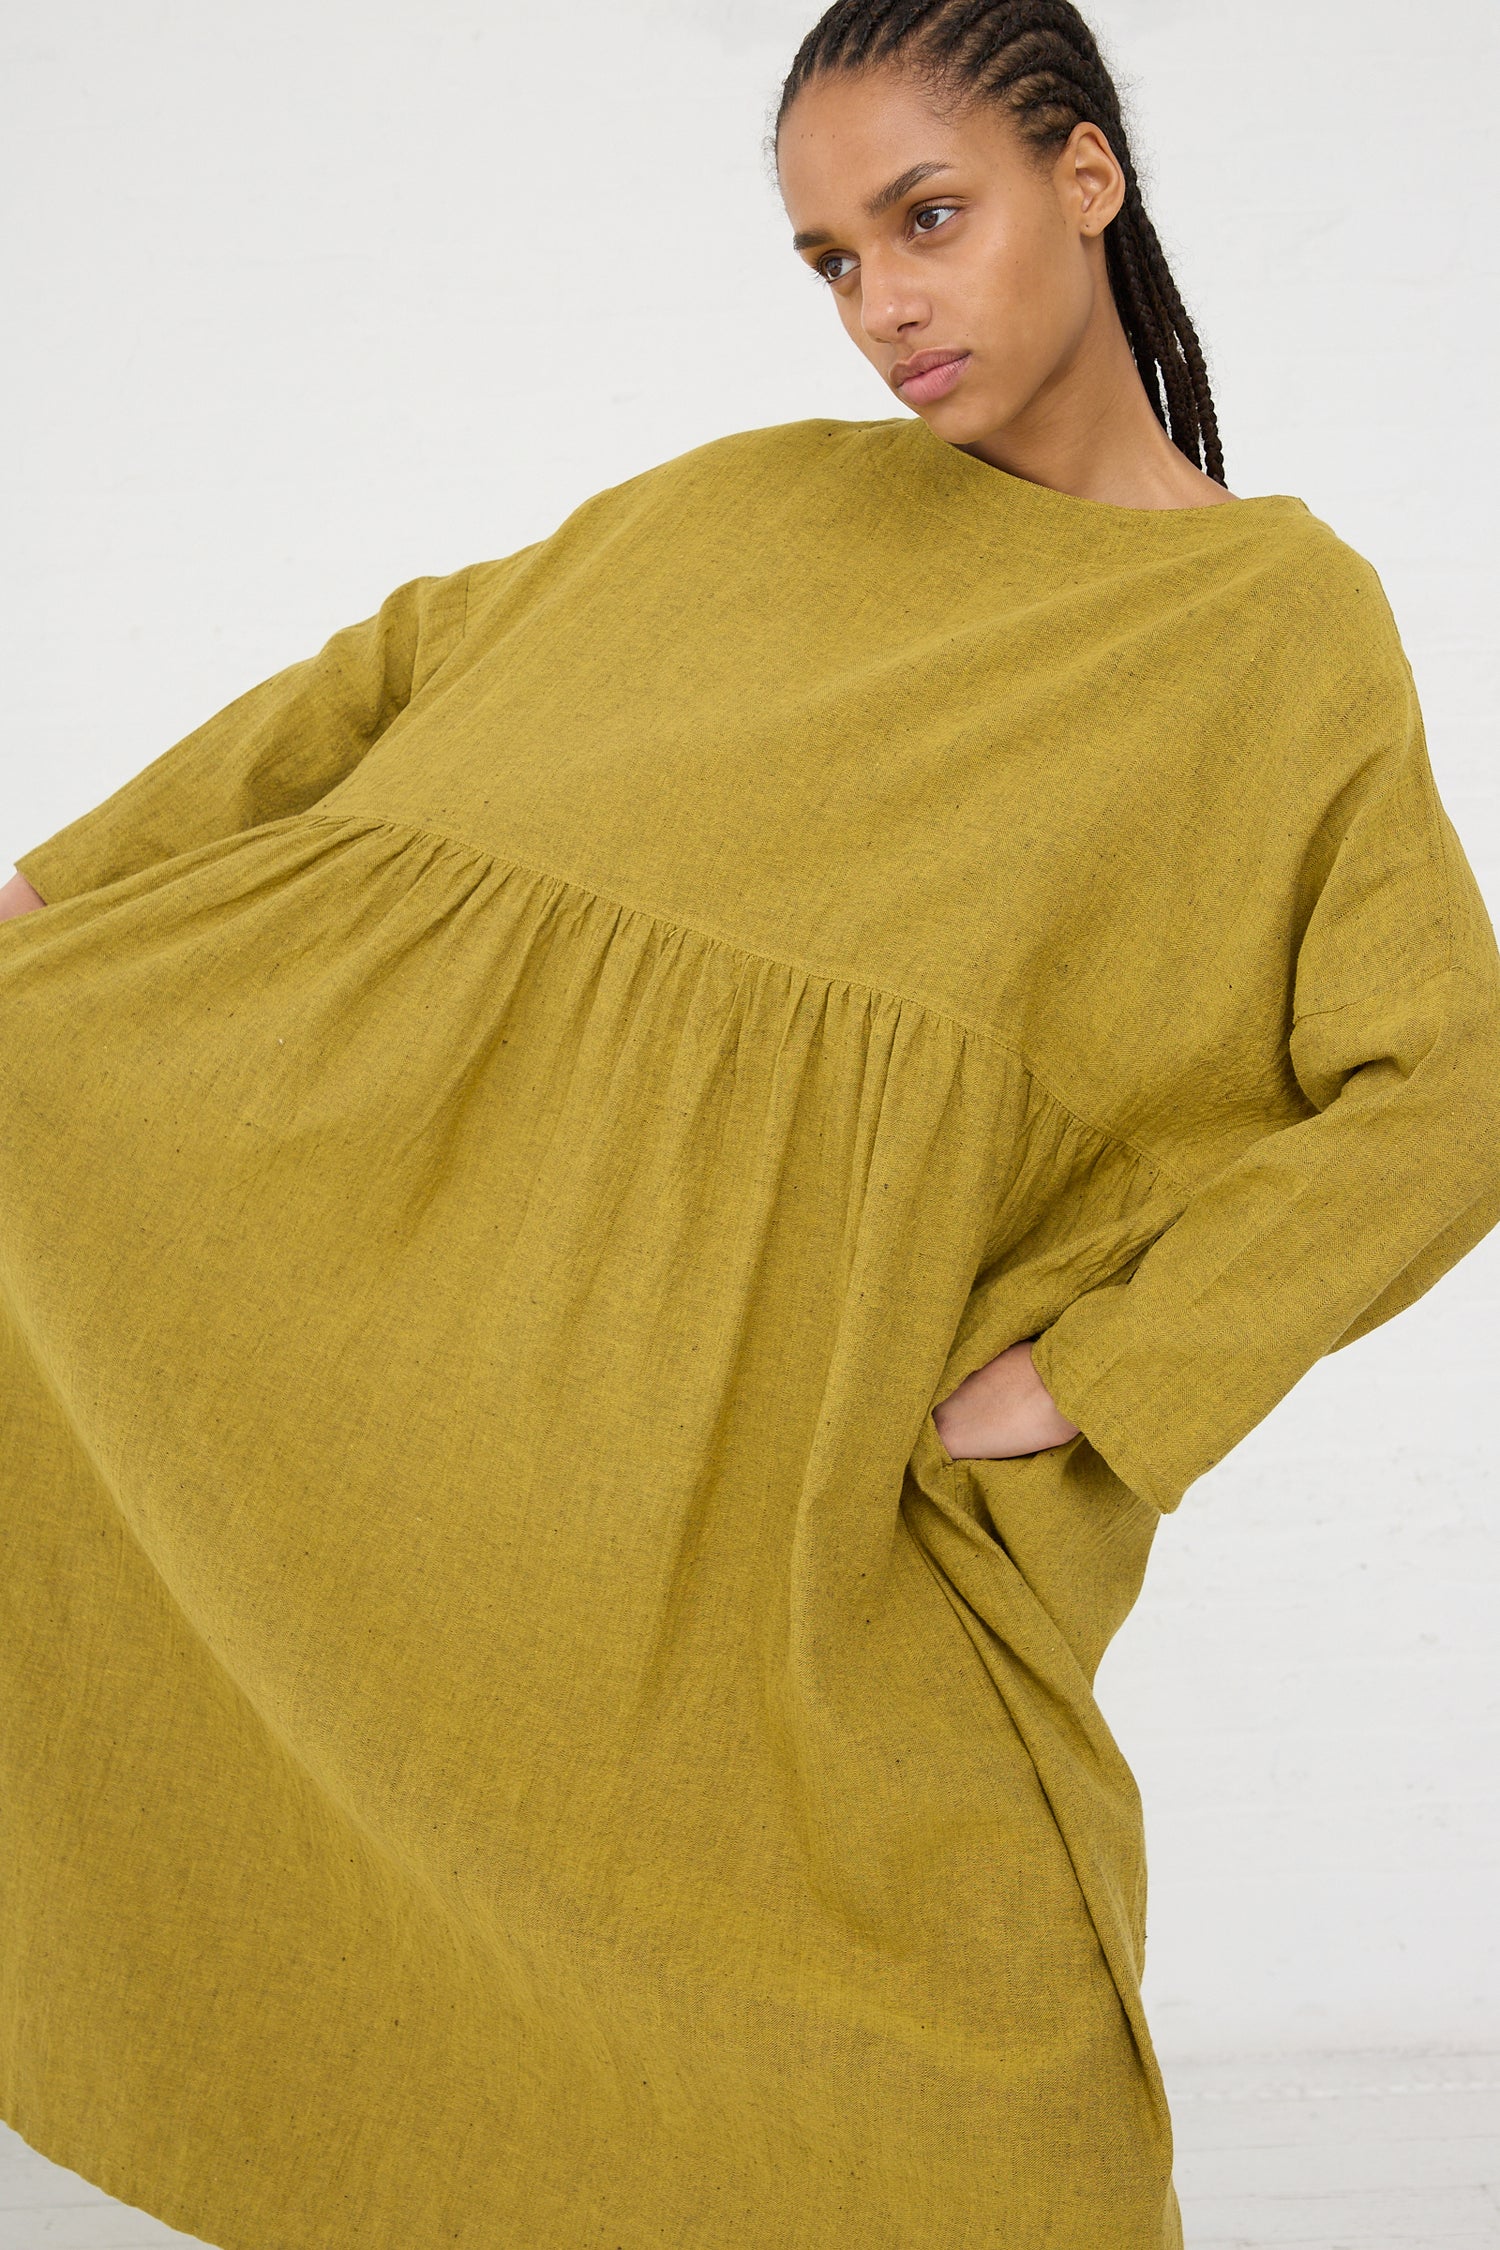 A woman in a loose-fitting, Linen Cotton Herringbone Dress in Yellow from Ichi Antiquités with her hand on her hip, against a white background.